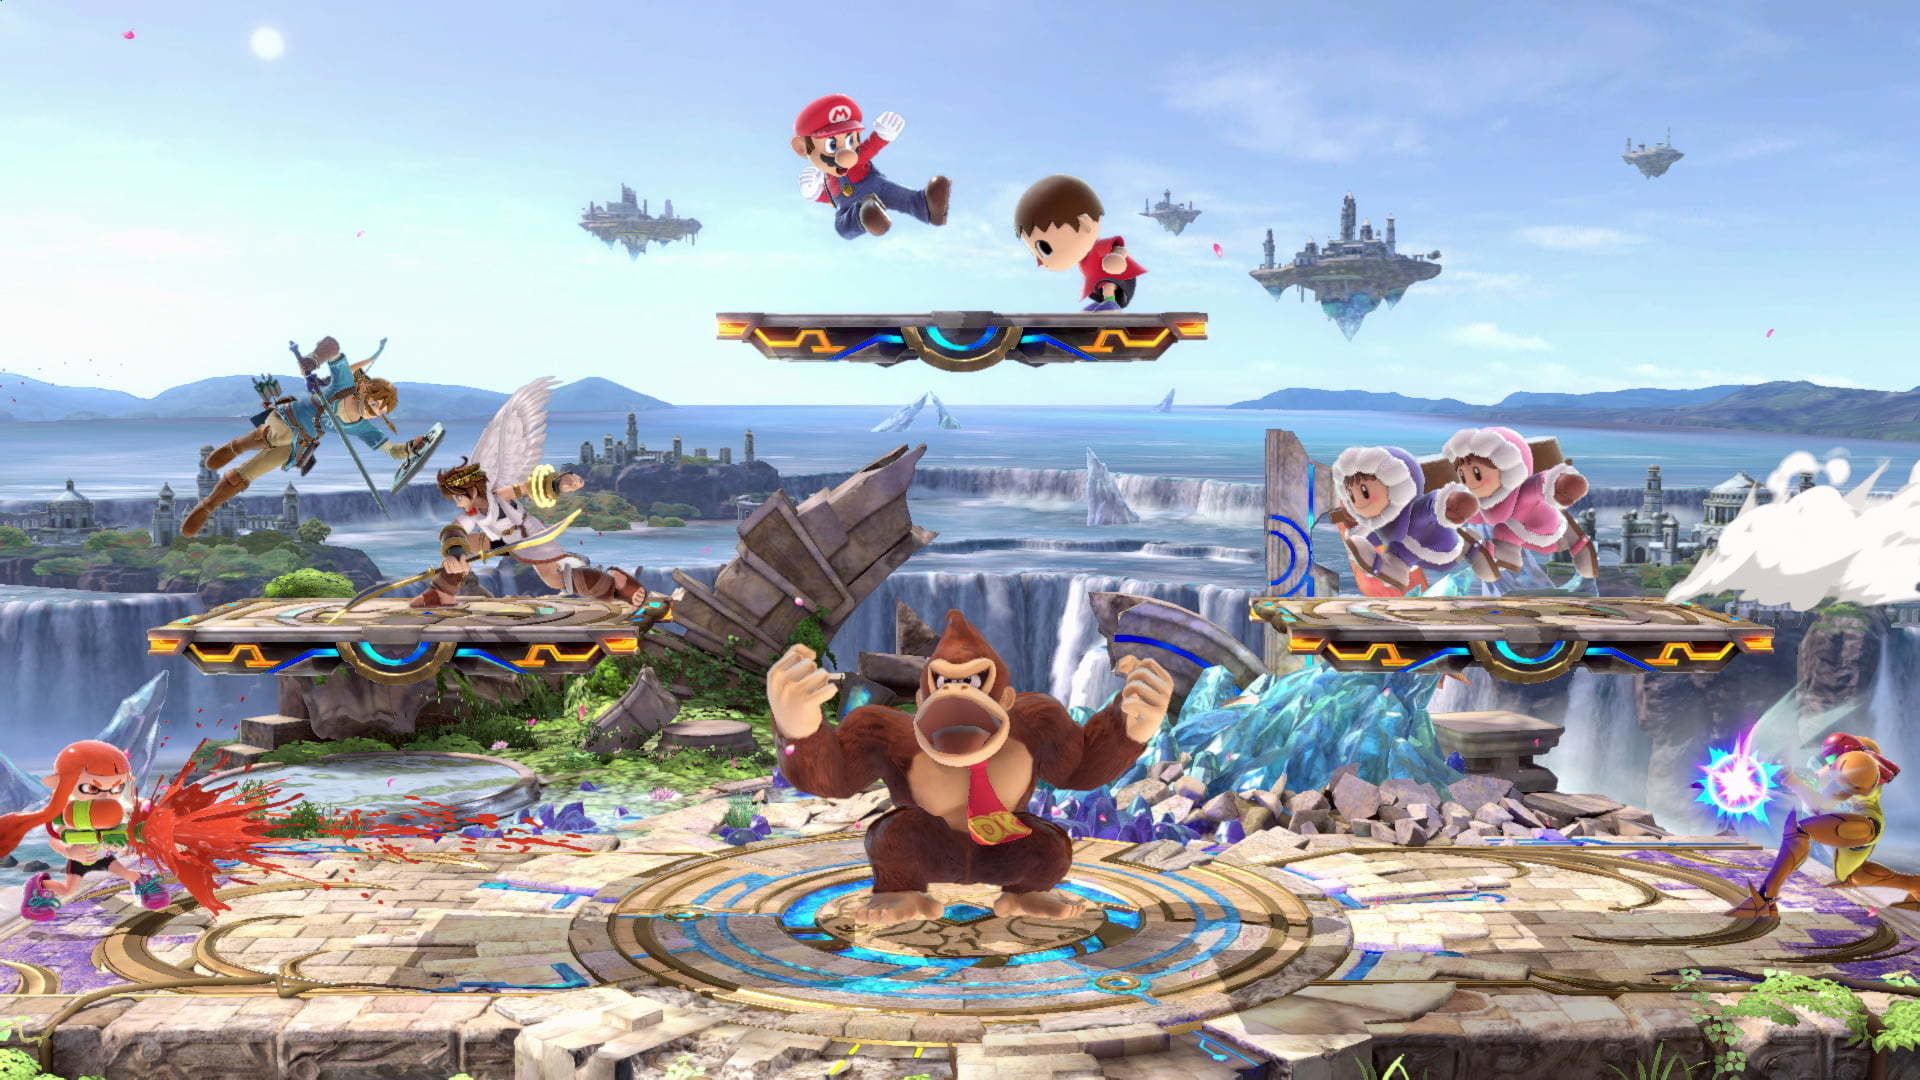 Super Smash Bros. Ultimate Mario Animal Crossing Ice Climbers Samus Donkey Kong Inkling Link and Pit fighting